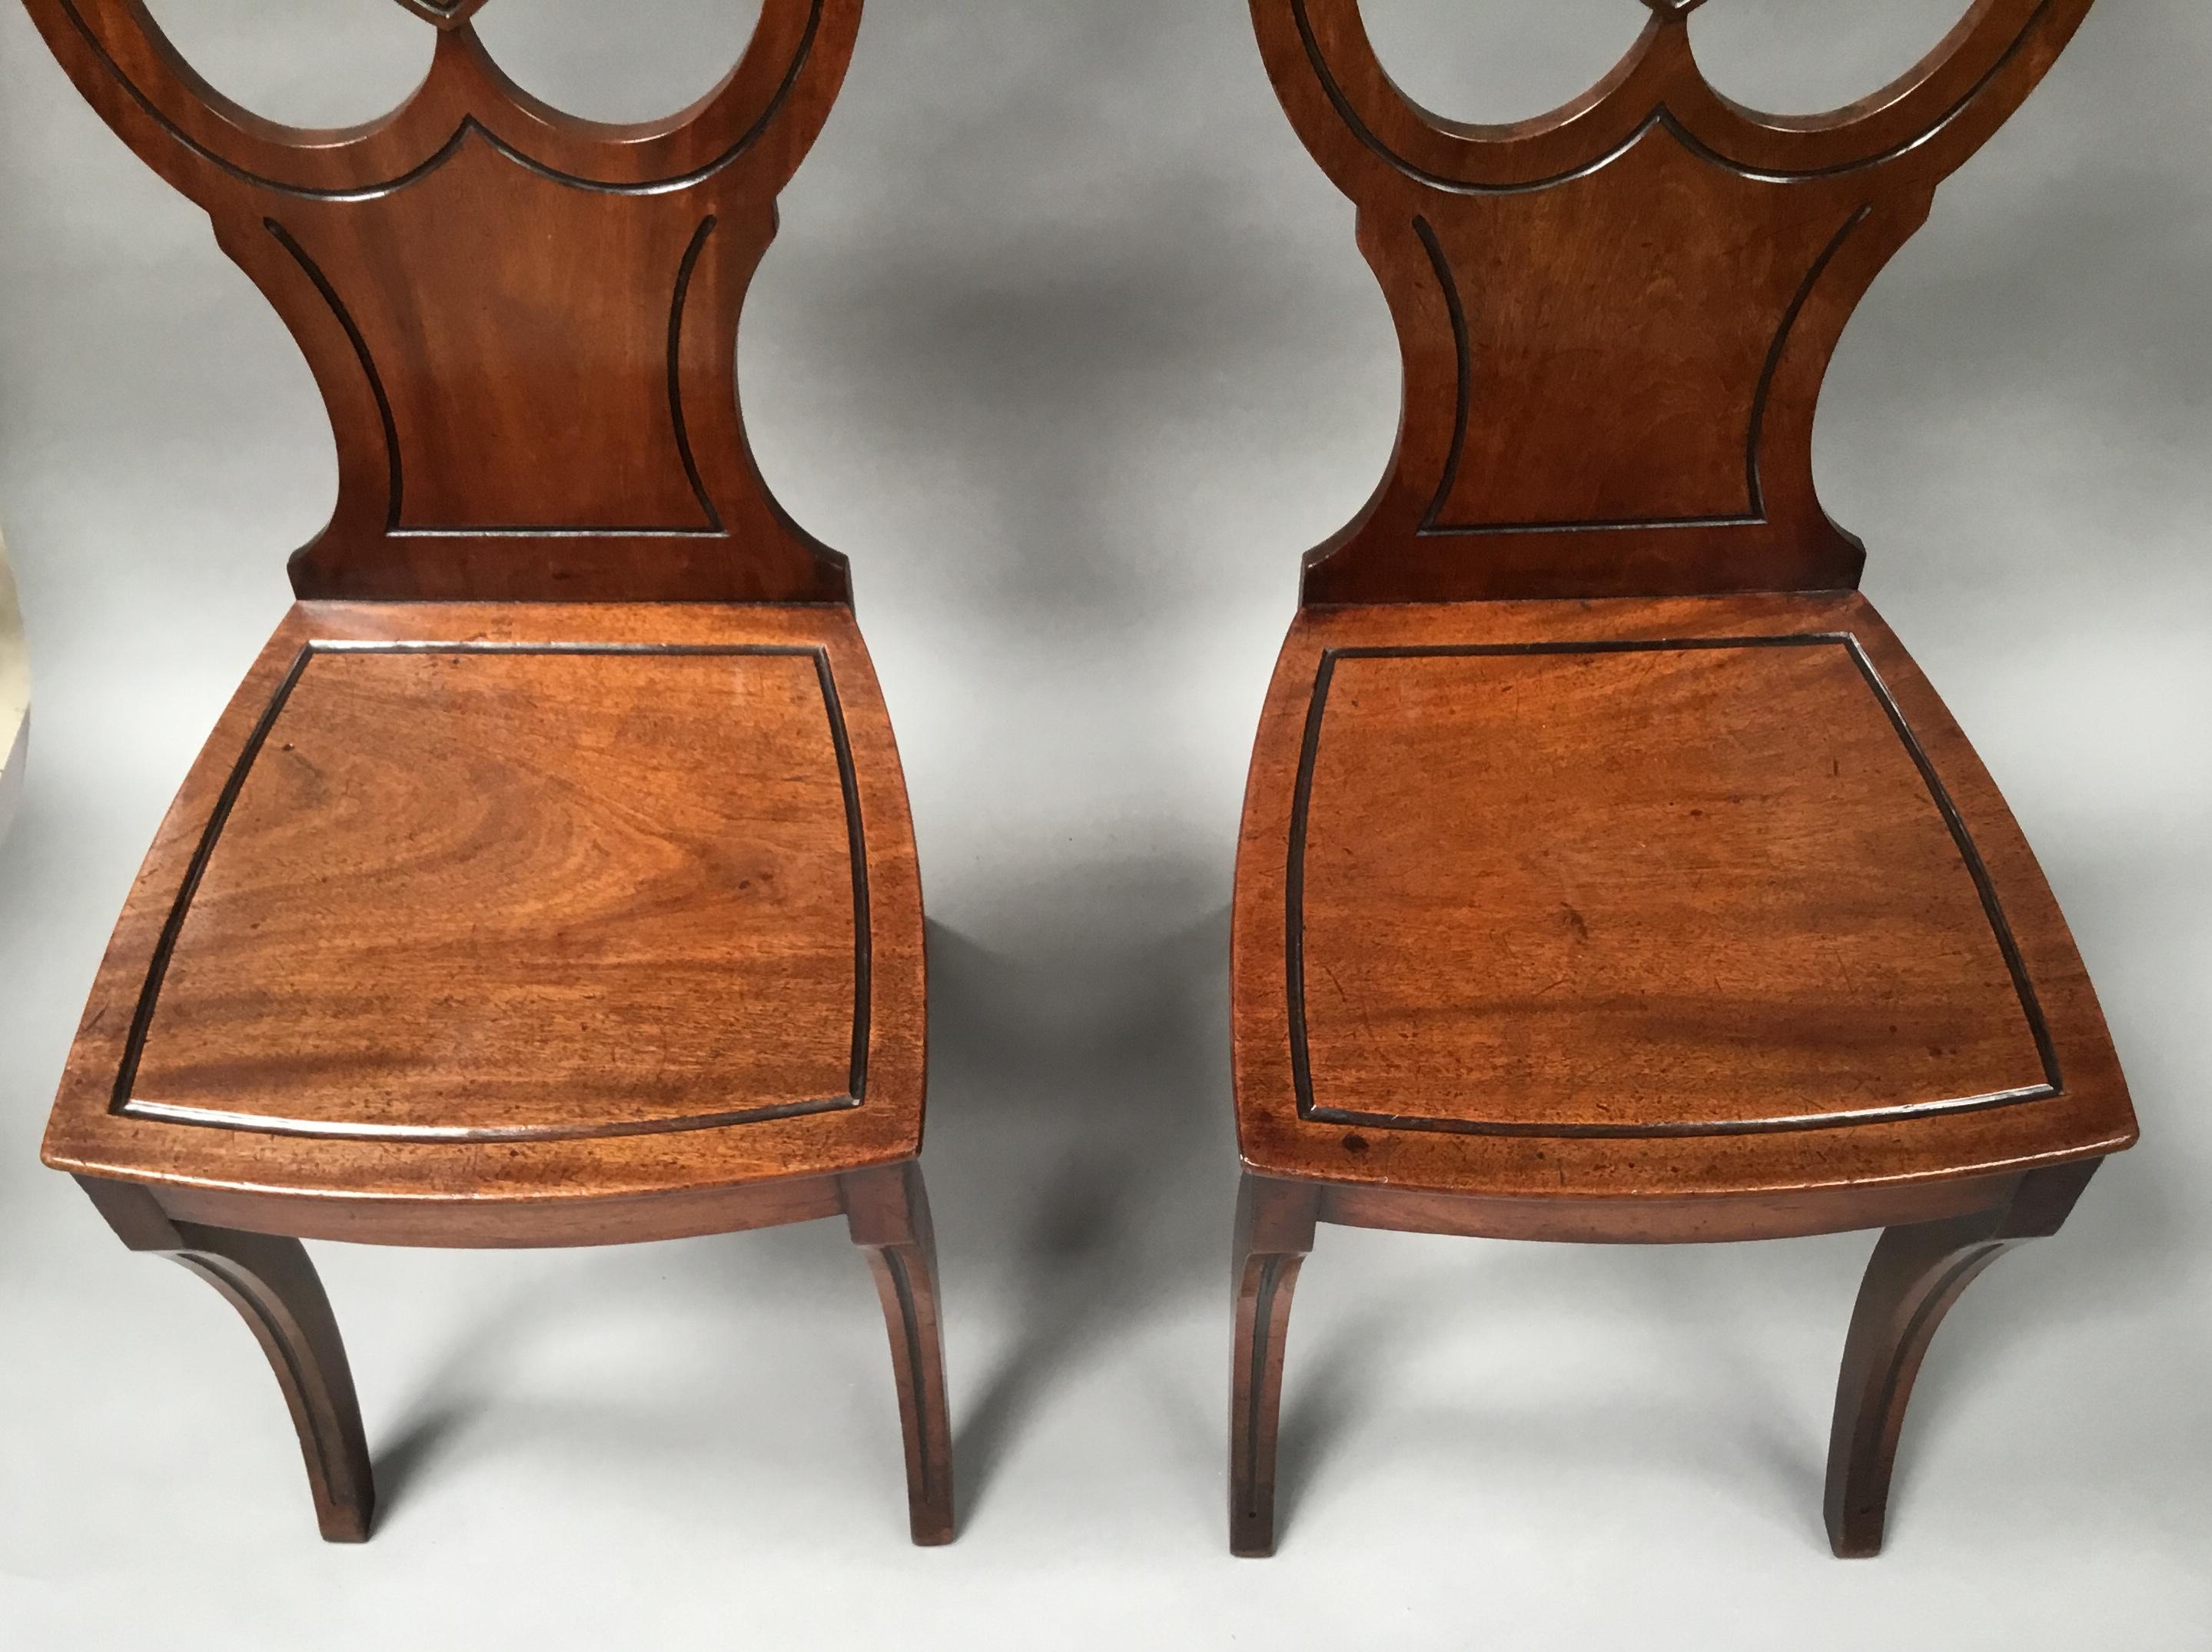 Regency Pair of Mahogany Hall Chairs In Good Condition For Sale In Moreton-in-Marsh, Gloucestershire